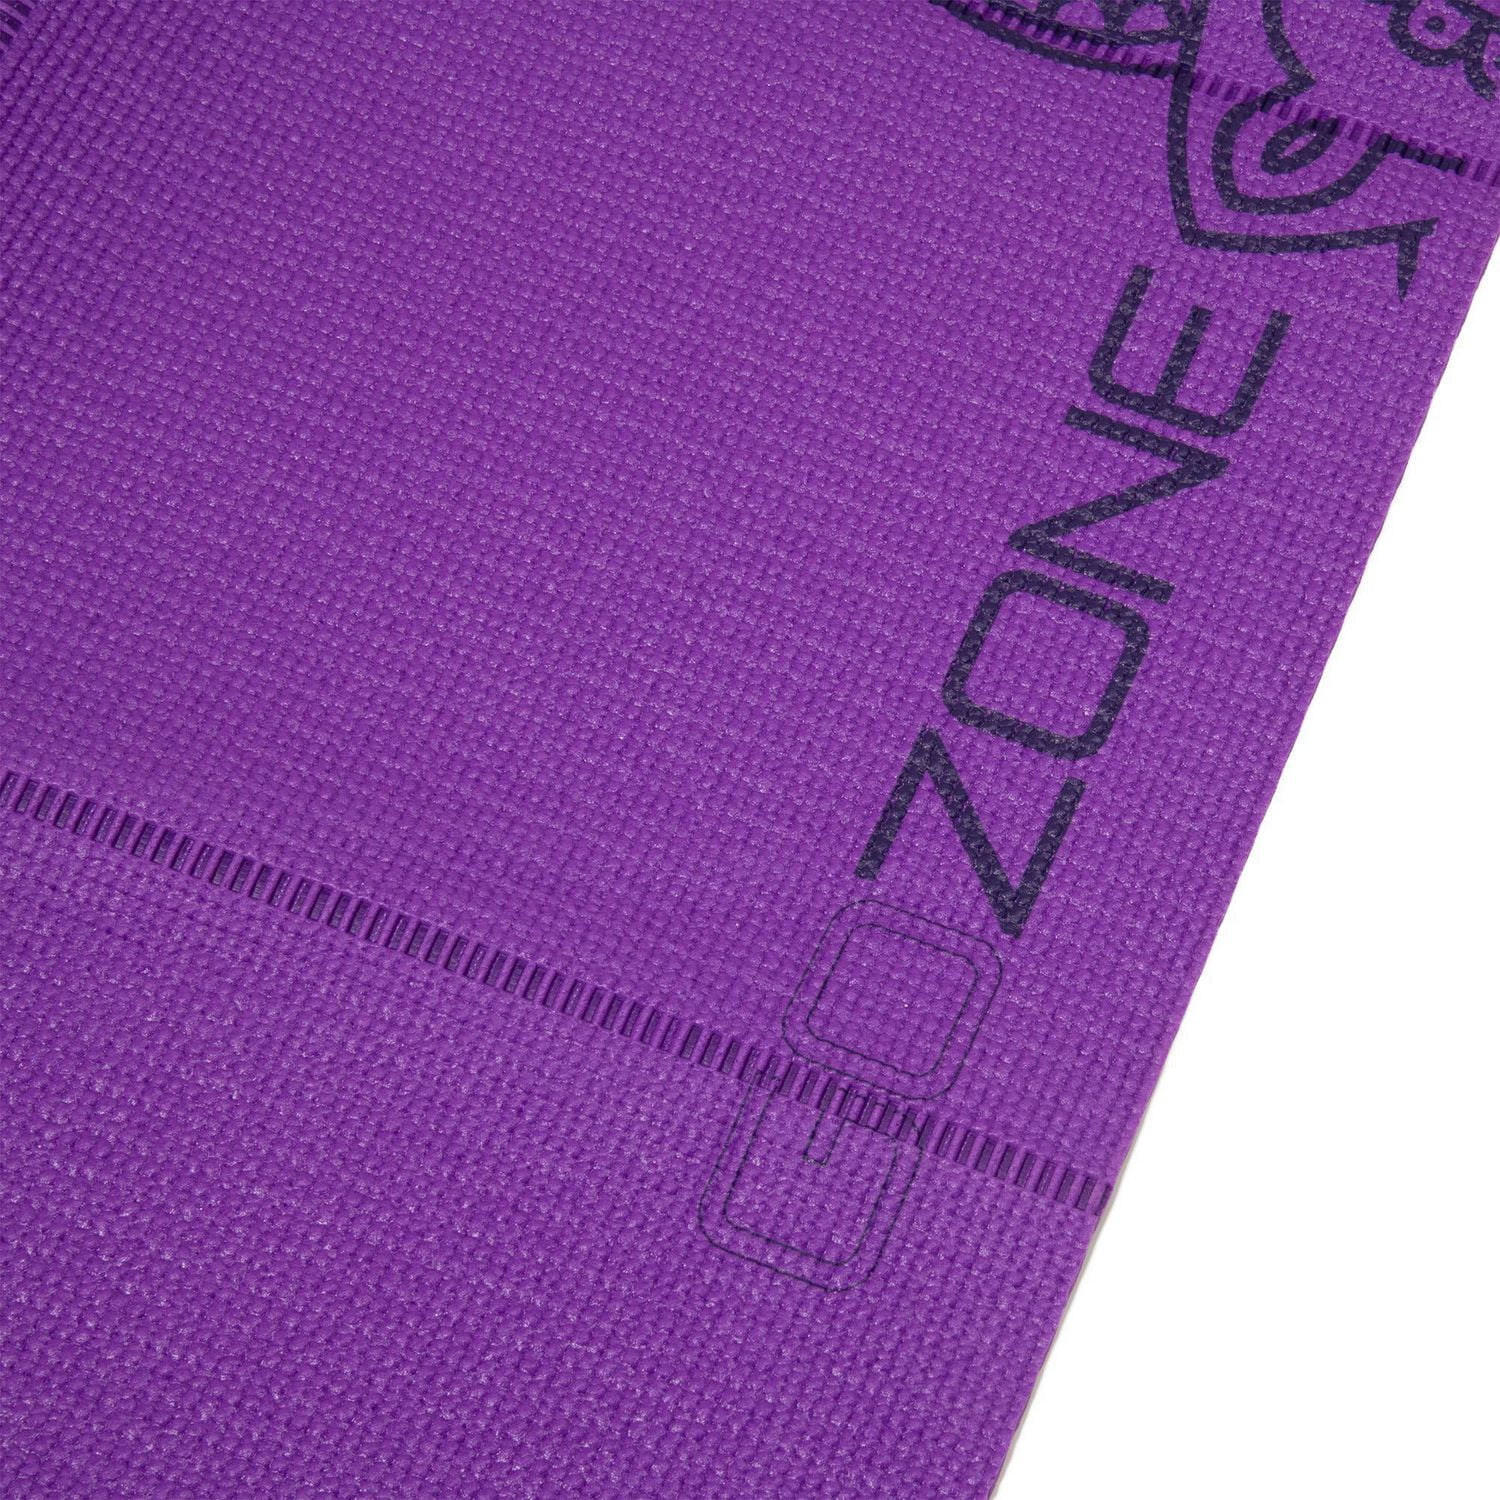 GoZone Printed Foldable Yoga Mat – Purple, Durable and lightweight 